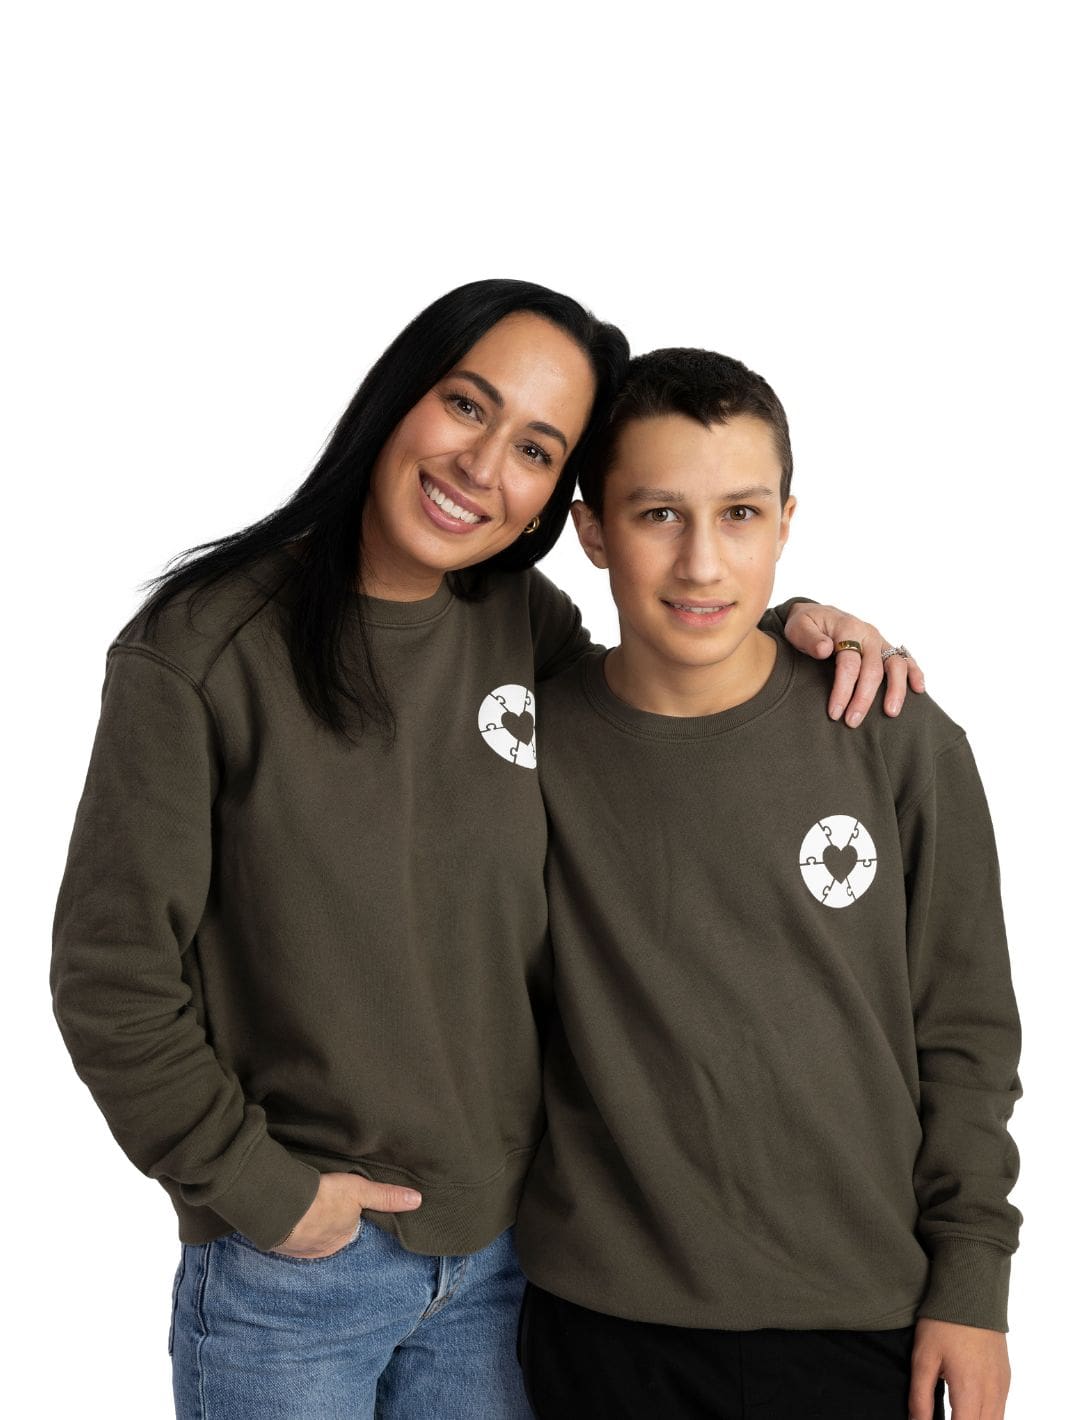 Individuals wearing a olive green sweater that features a white heart on the left chest, representing the Ryder's Foundation for Autism, this exclusive Local Laundry piece is sustainably made in Canada and aims to support local communities and raise awareness for those diagnosed with Autism.